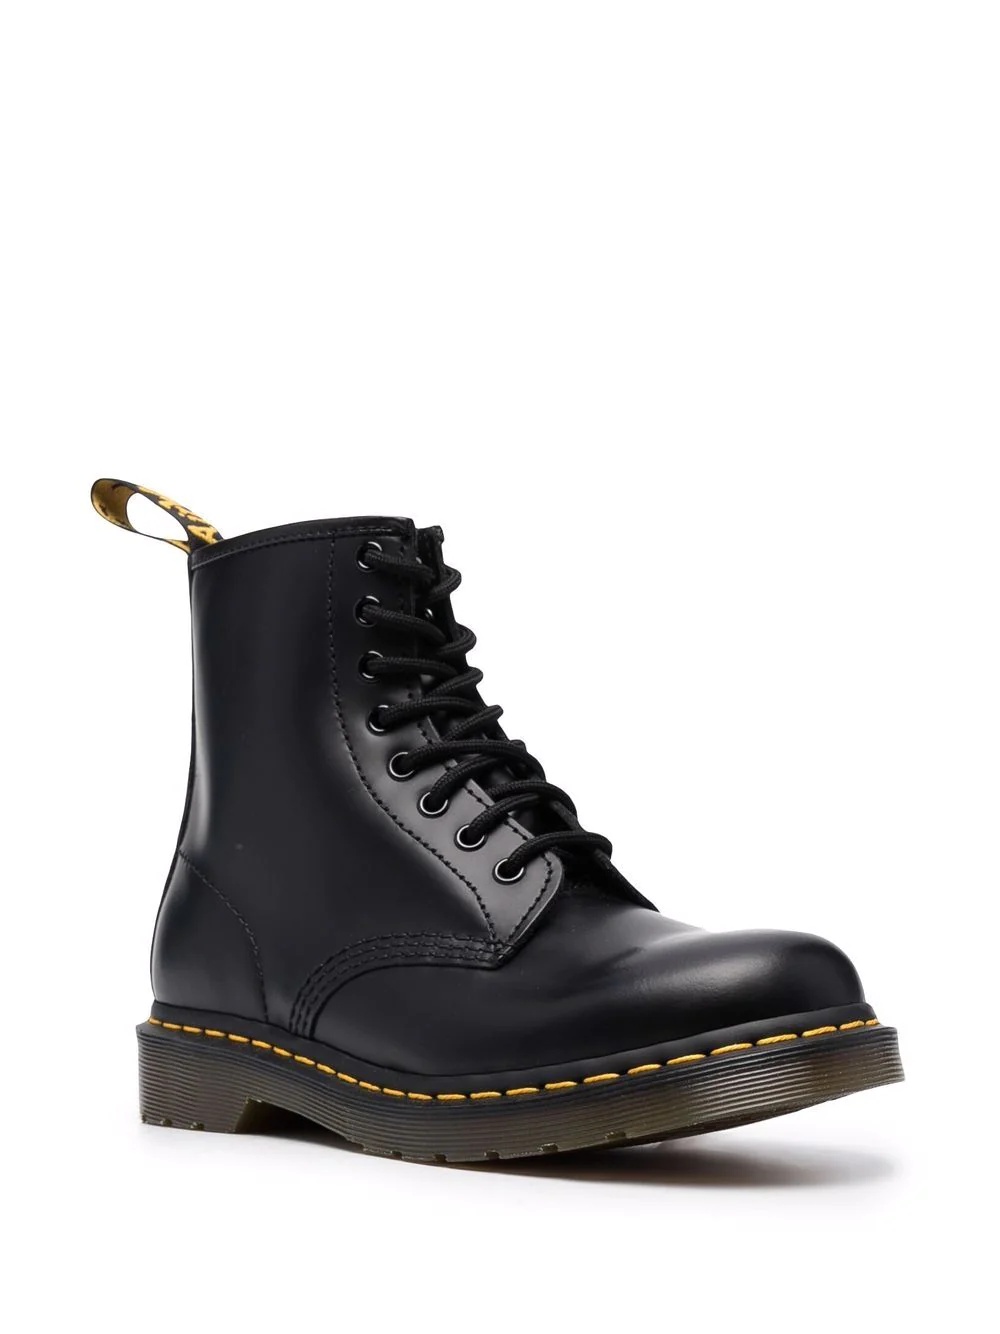 DR. MARTENS 1460 Smooth Leather Lace Up Boots - 2